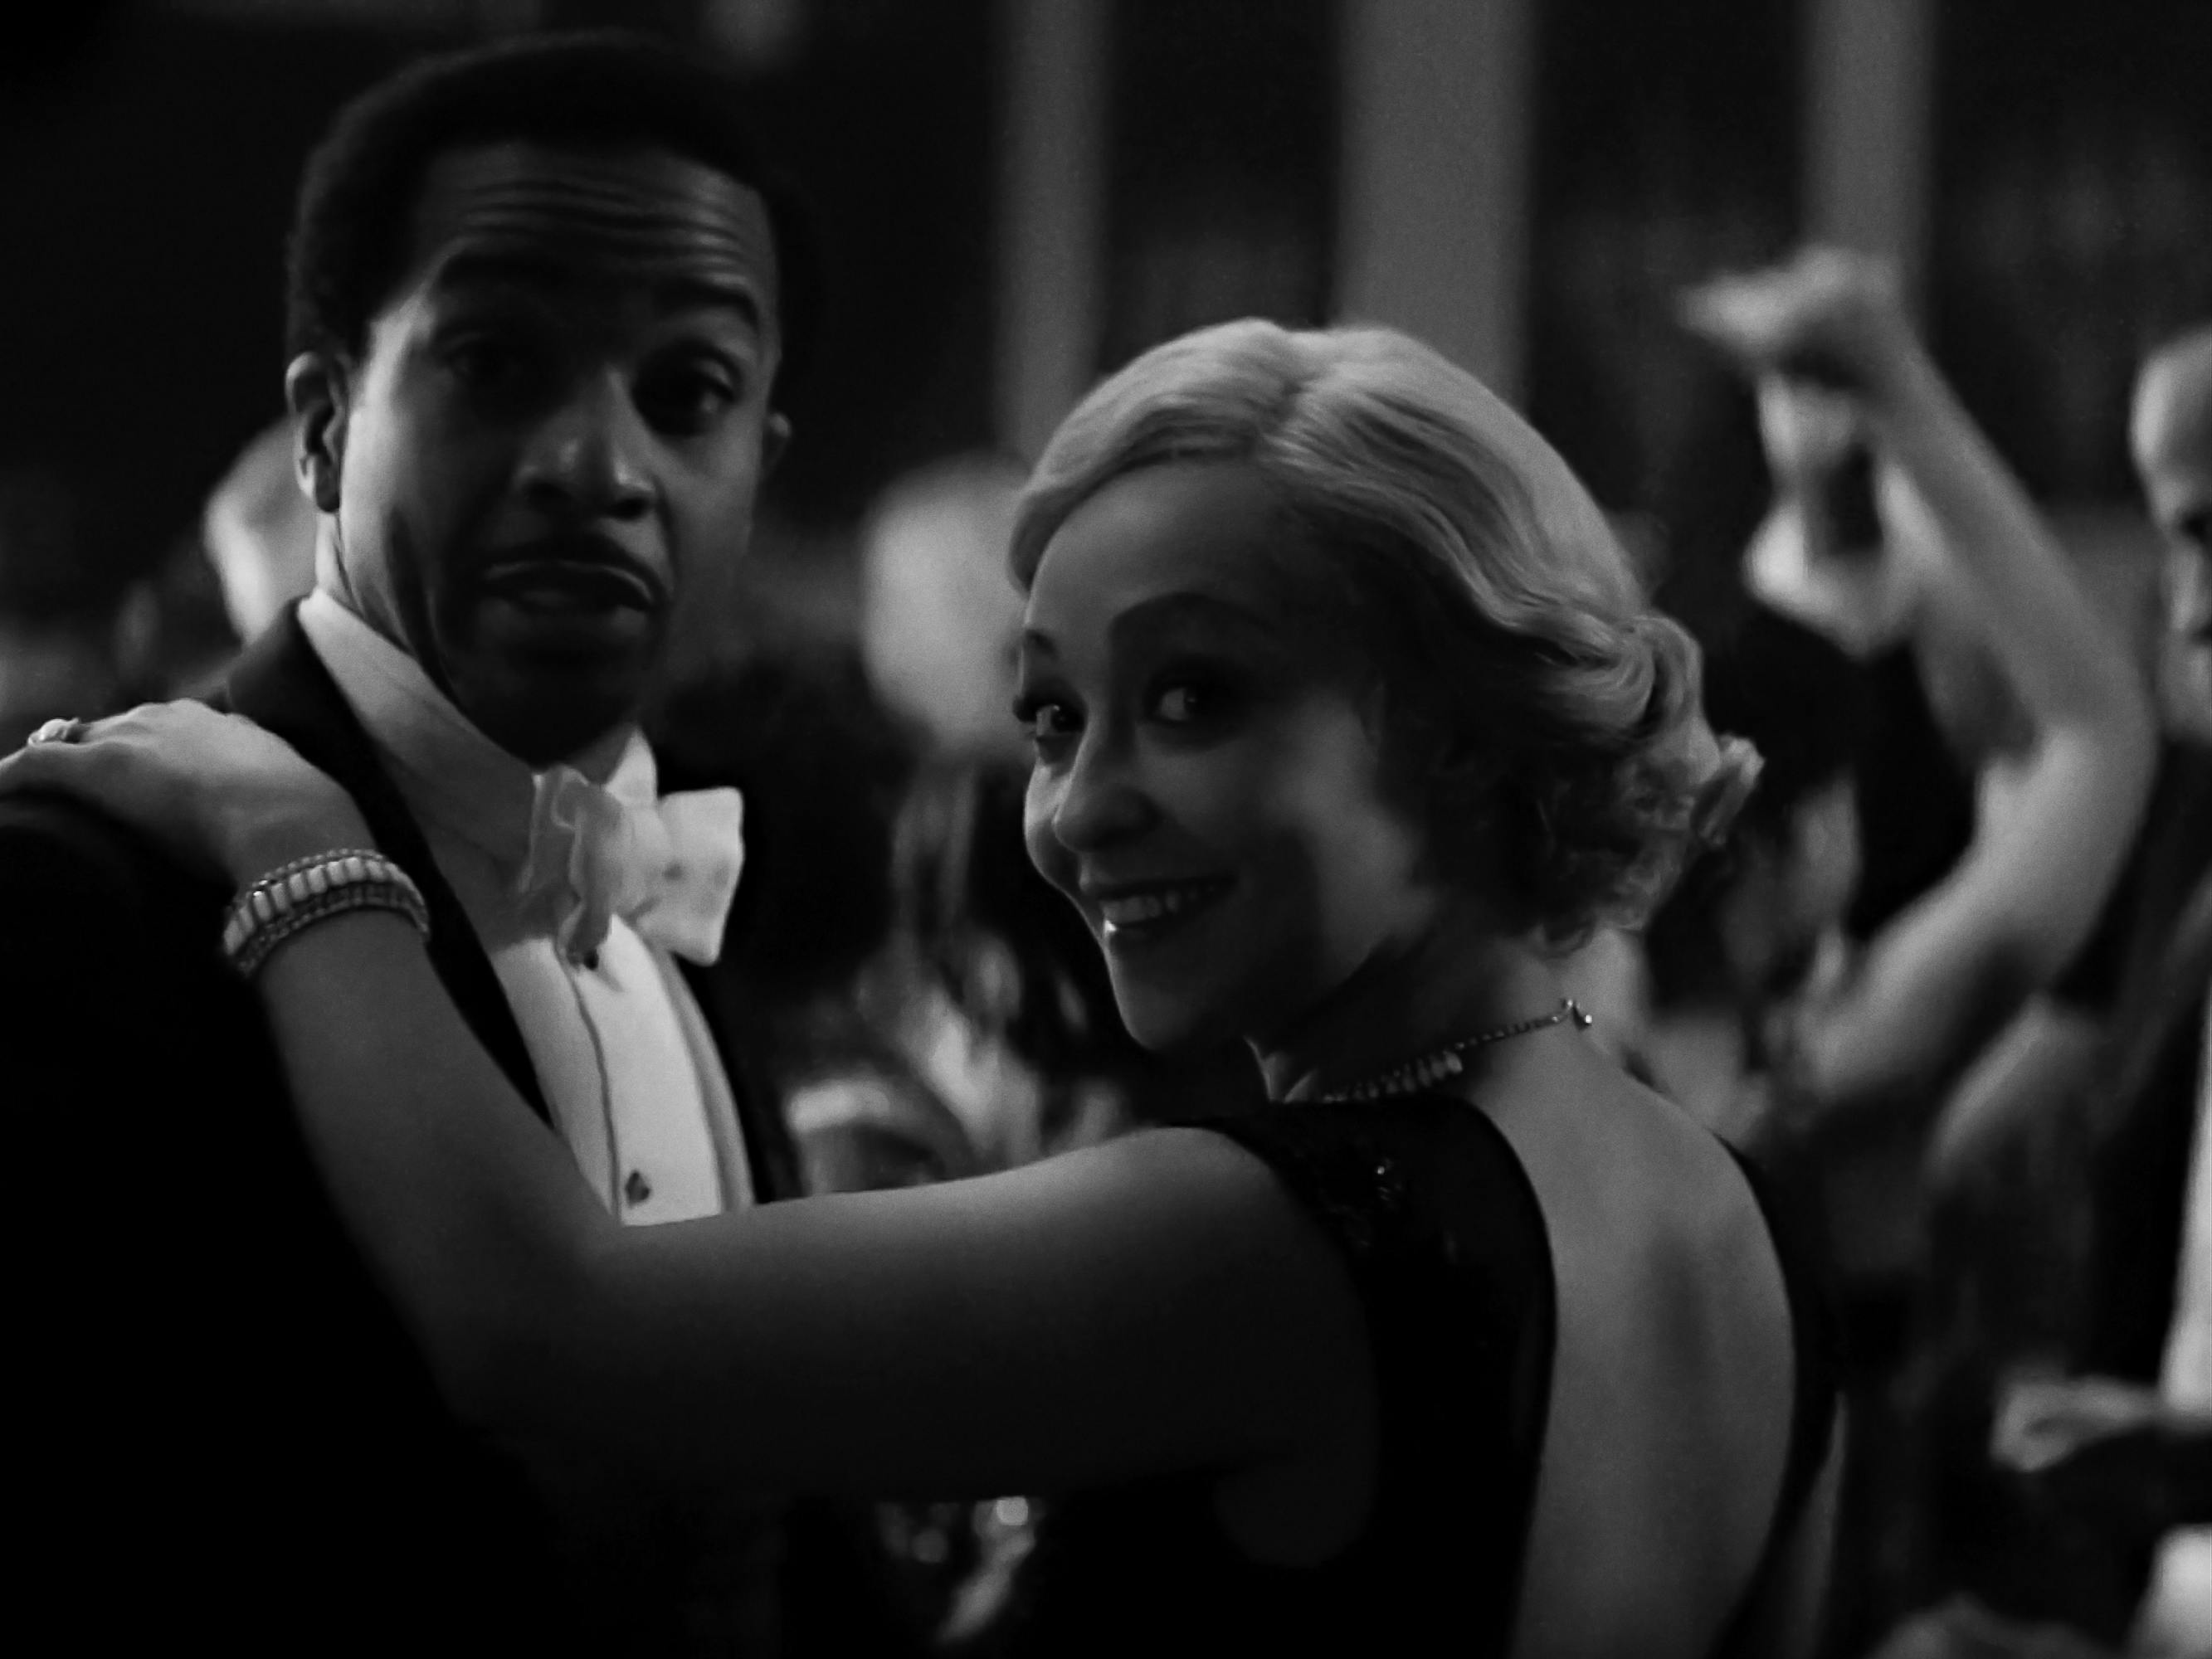 André Holland and Ruth Negga dance together in this black-and-white shot.